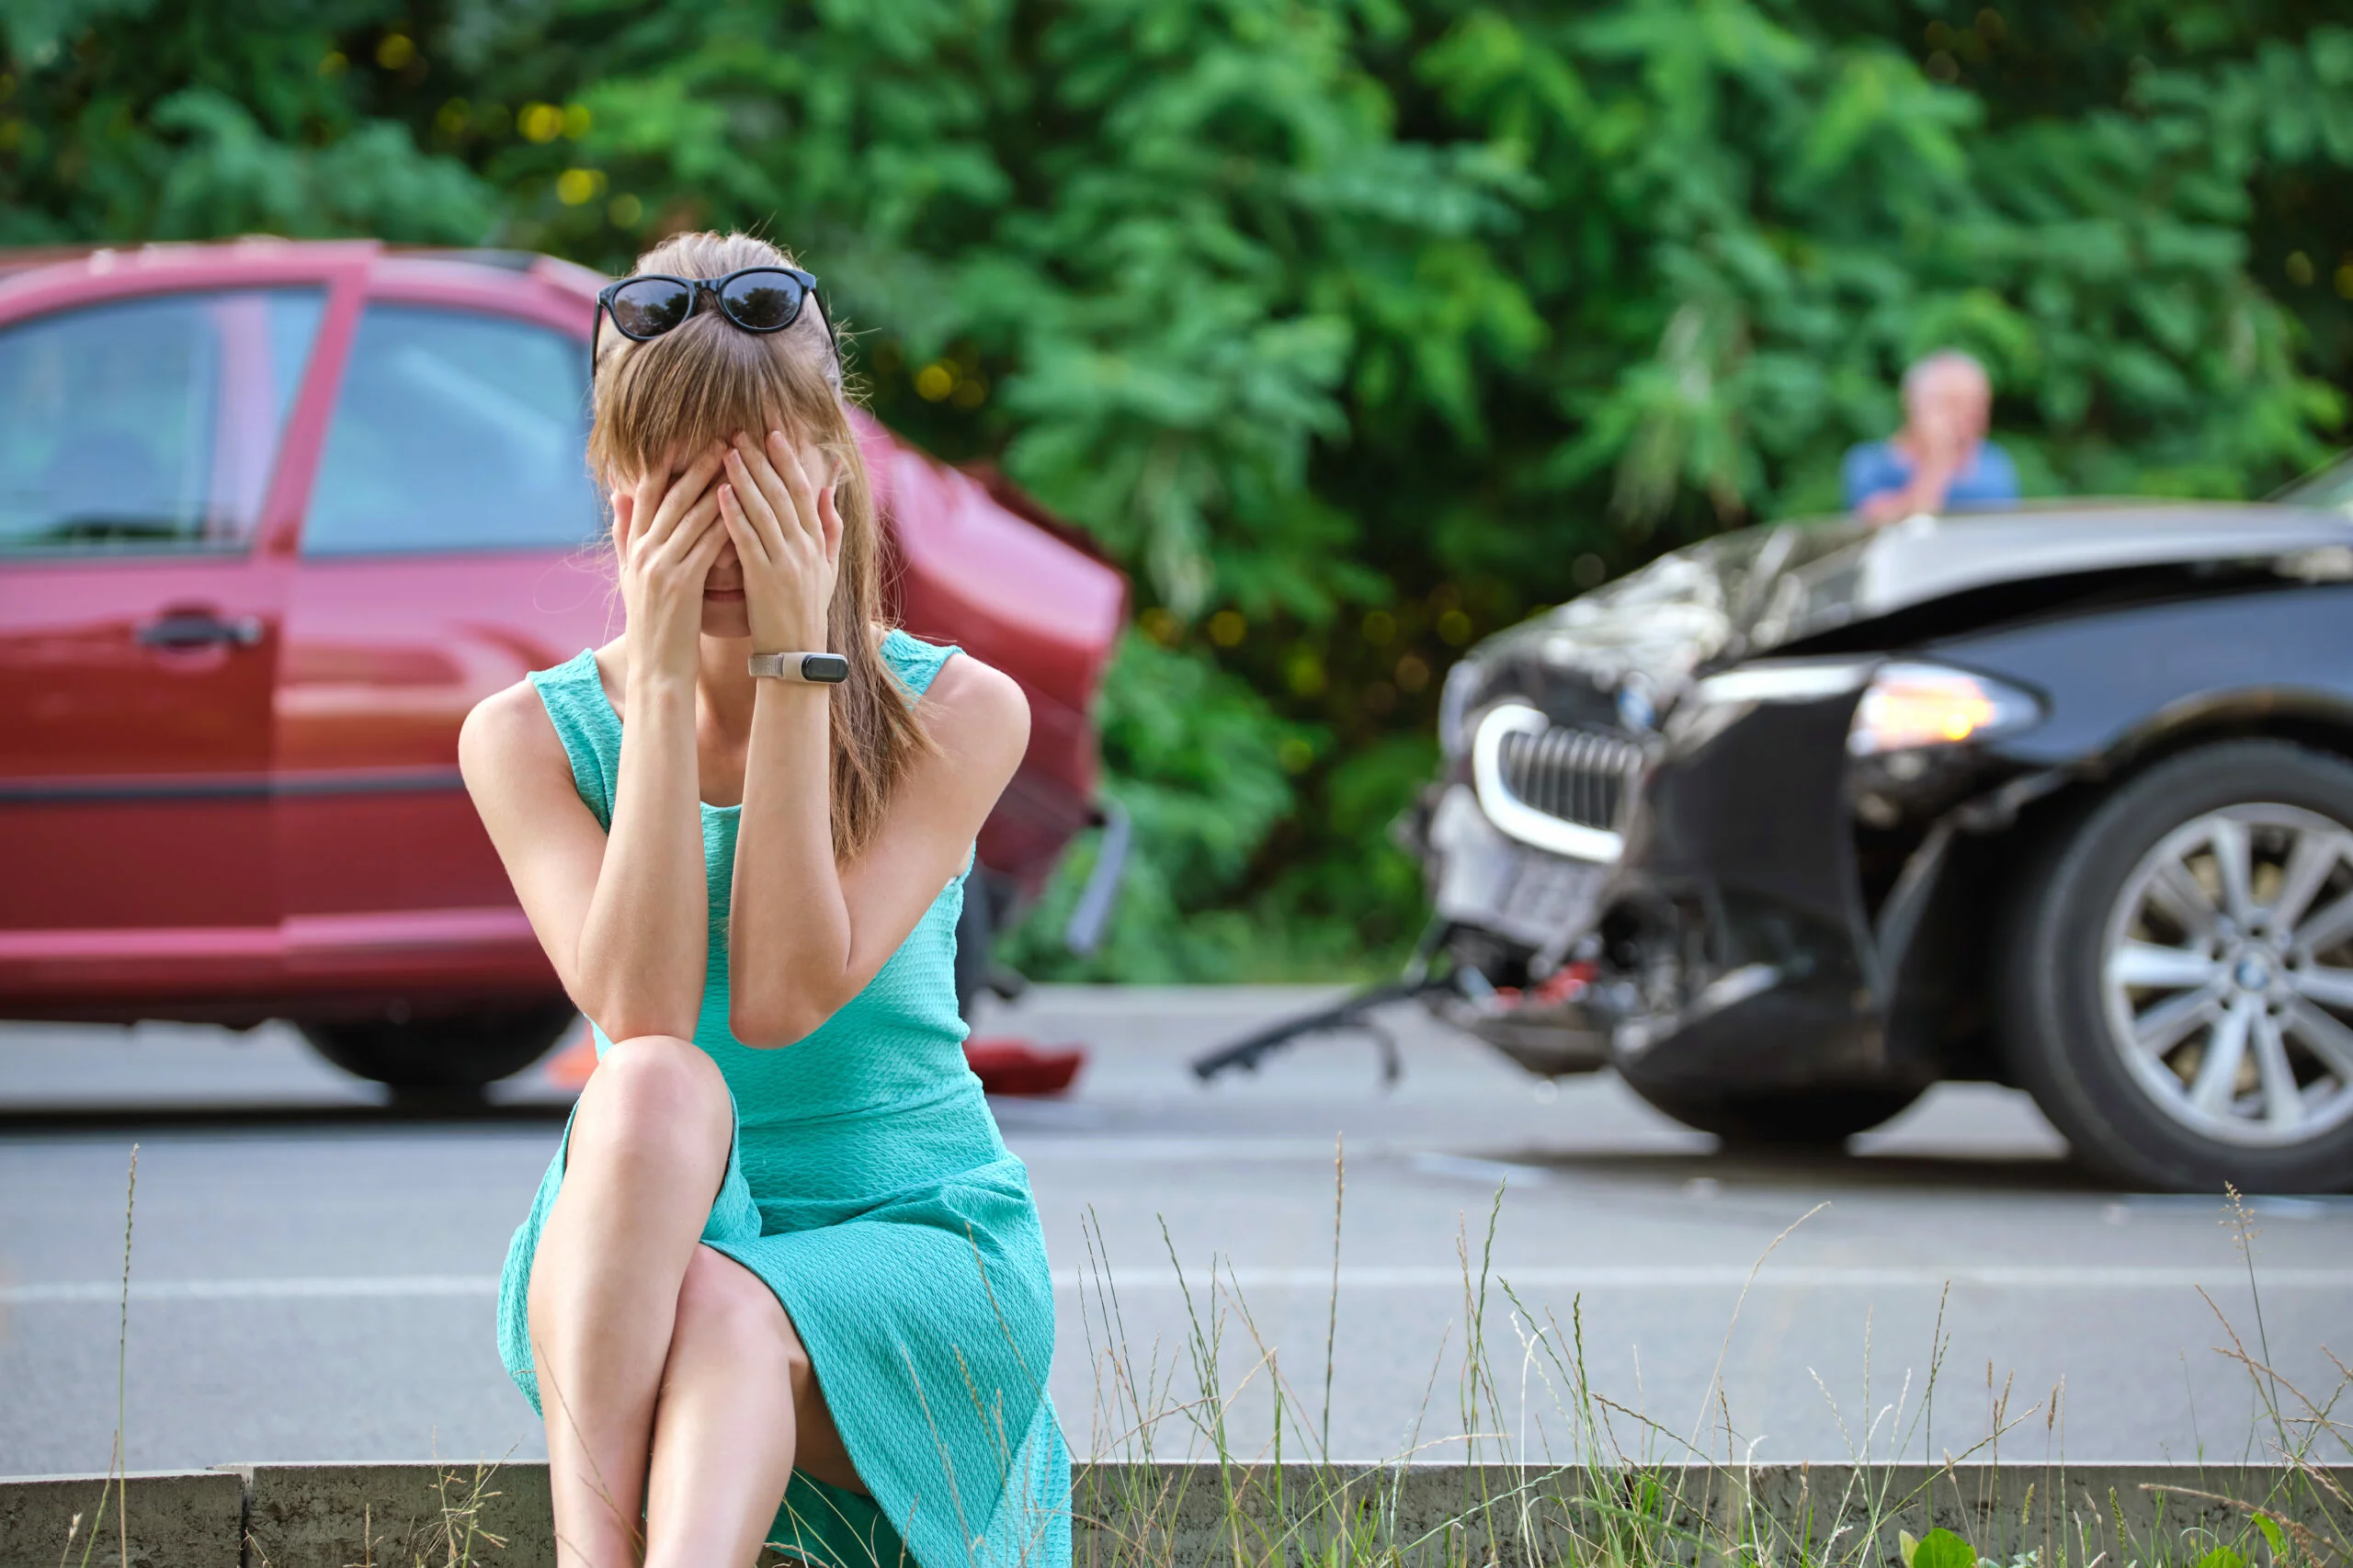 Determining Liability for Auto Accidents in California